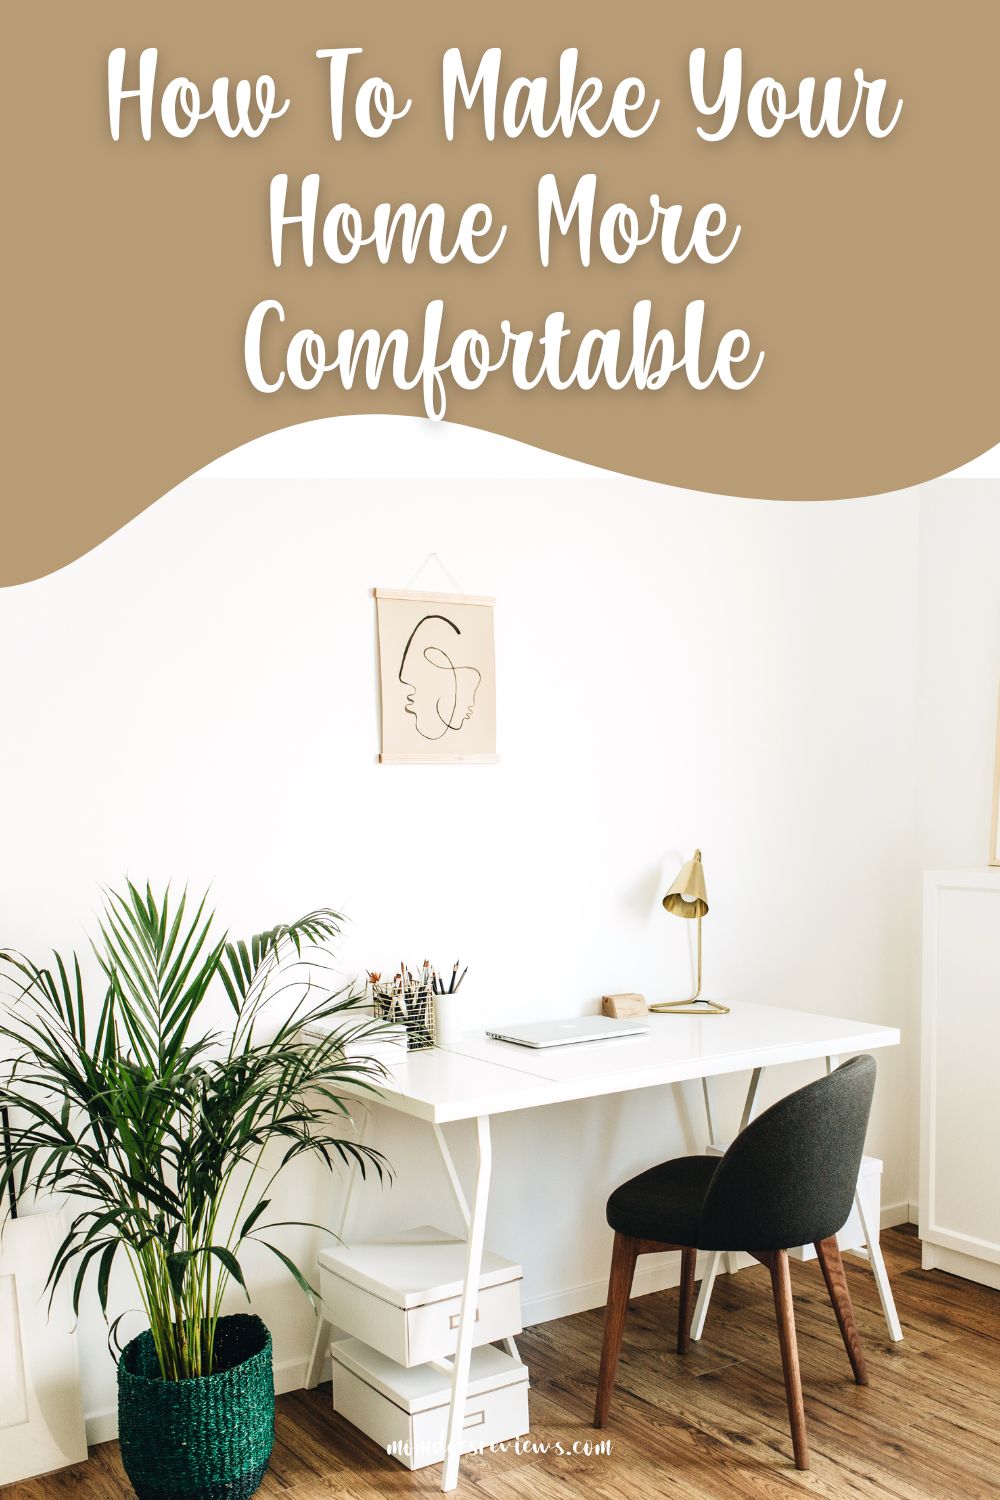 How To Make Your Home More Comfortable